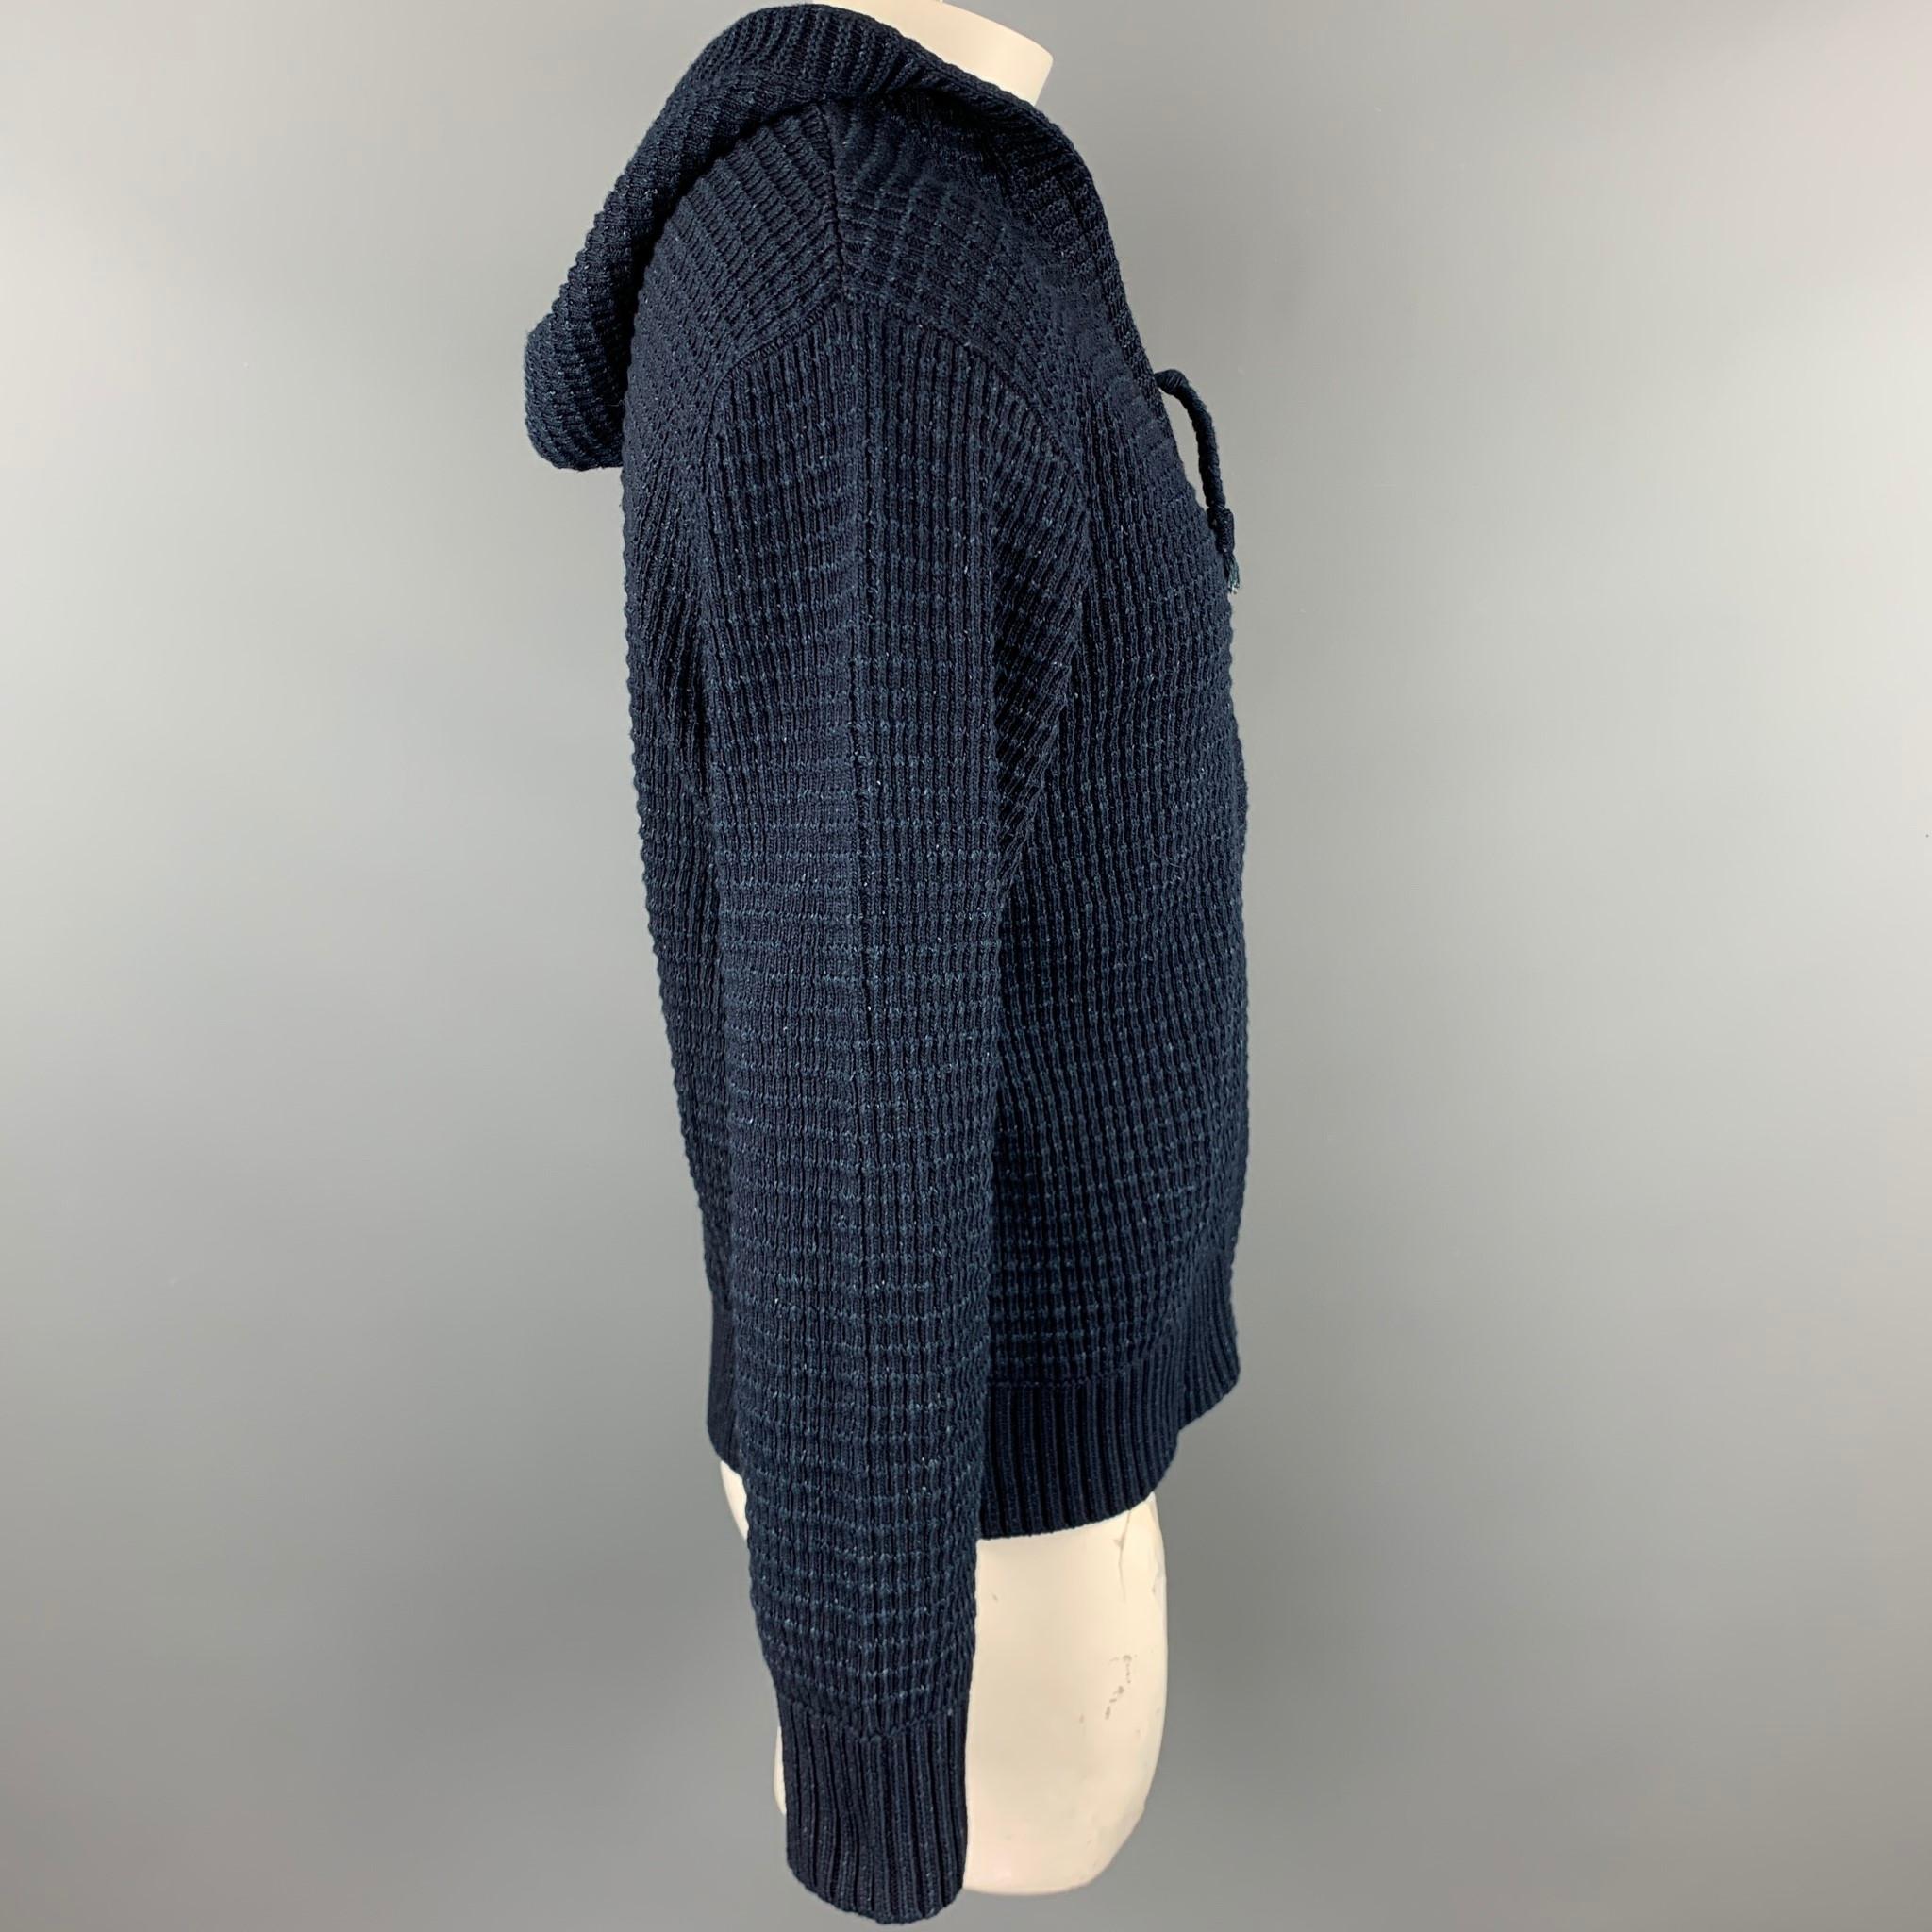 45rpm jacket comes in a navy ribbed cotton featuring a hooded style and a zip up closure. 

Excellent Pre-Owned Condition.
Marked: 5
Original Retail Price: $928.00

Measurements:

Shoulder: 21 in. 
Chest: 44 in. 
Sleeve: 24 in. 
Length: 25.5 in. 